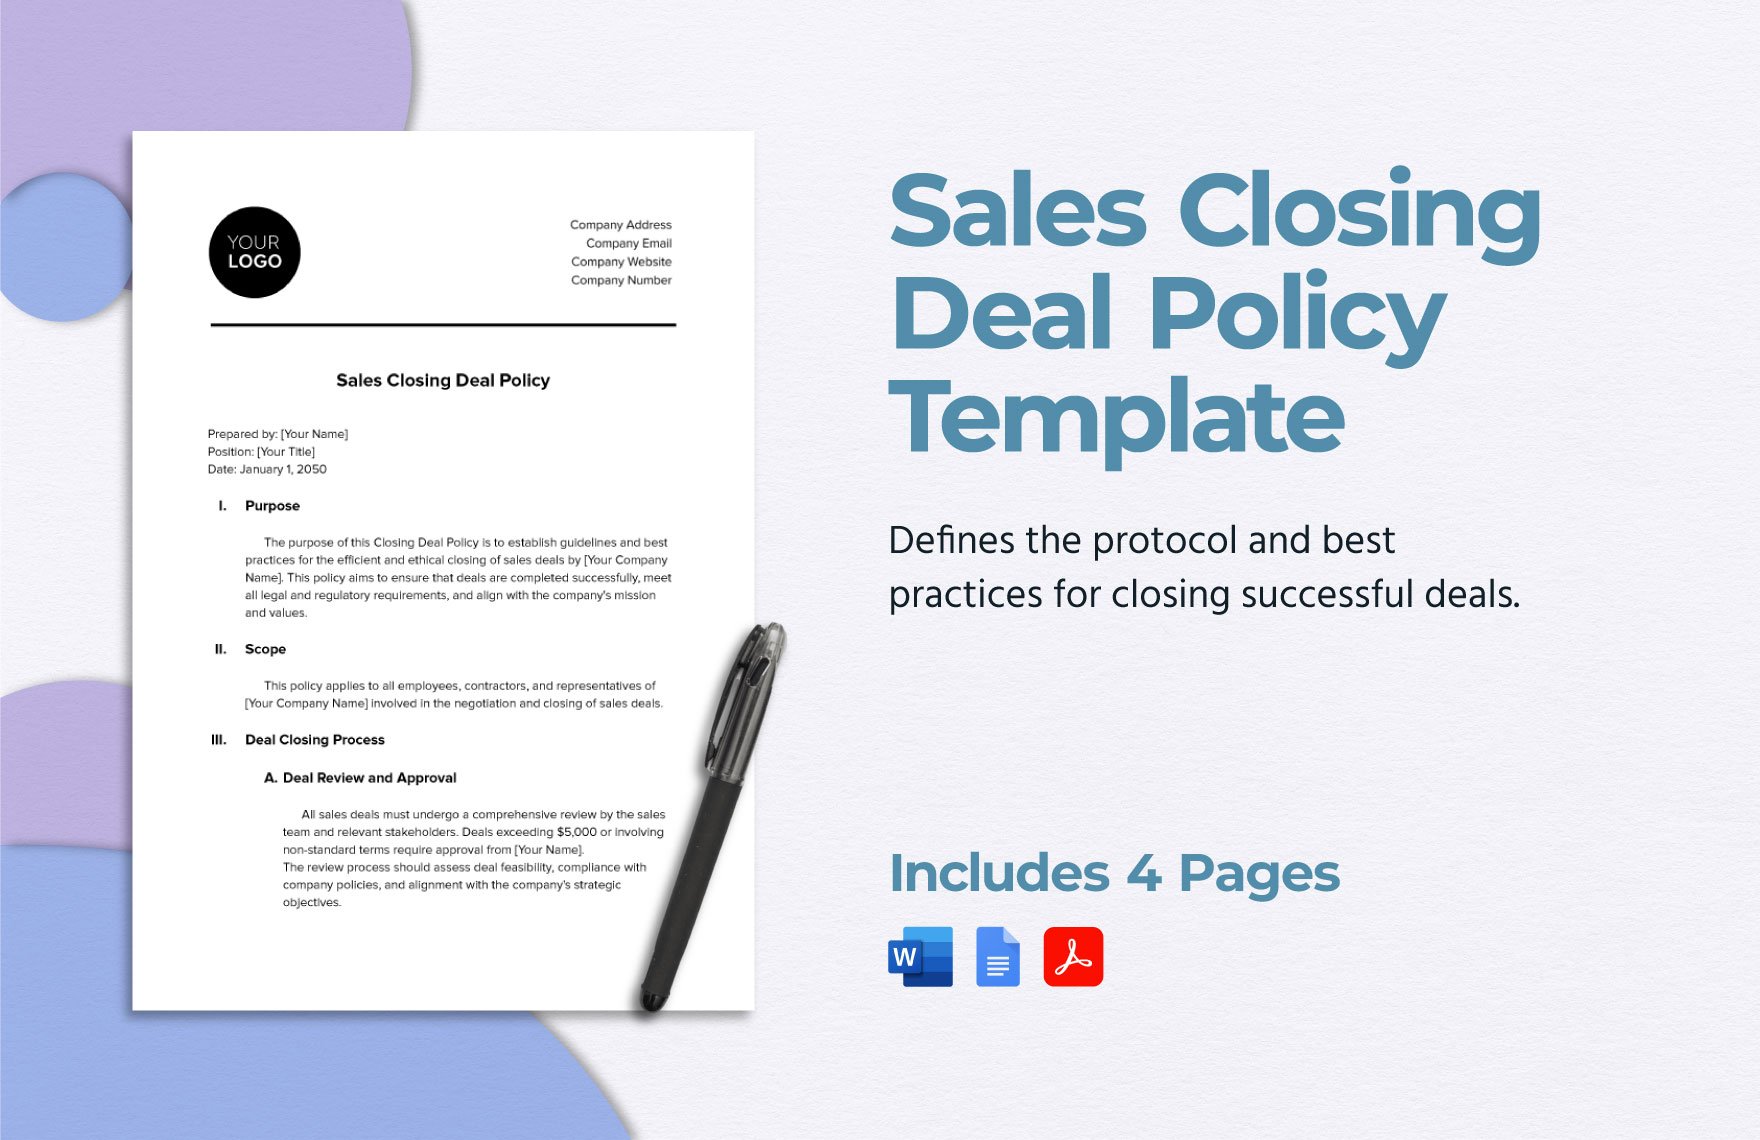 Sales Closing Deal Policy Template